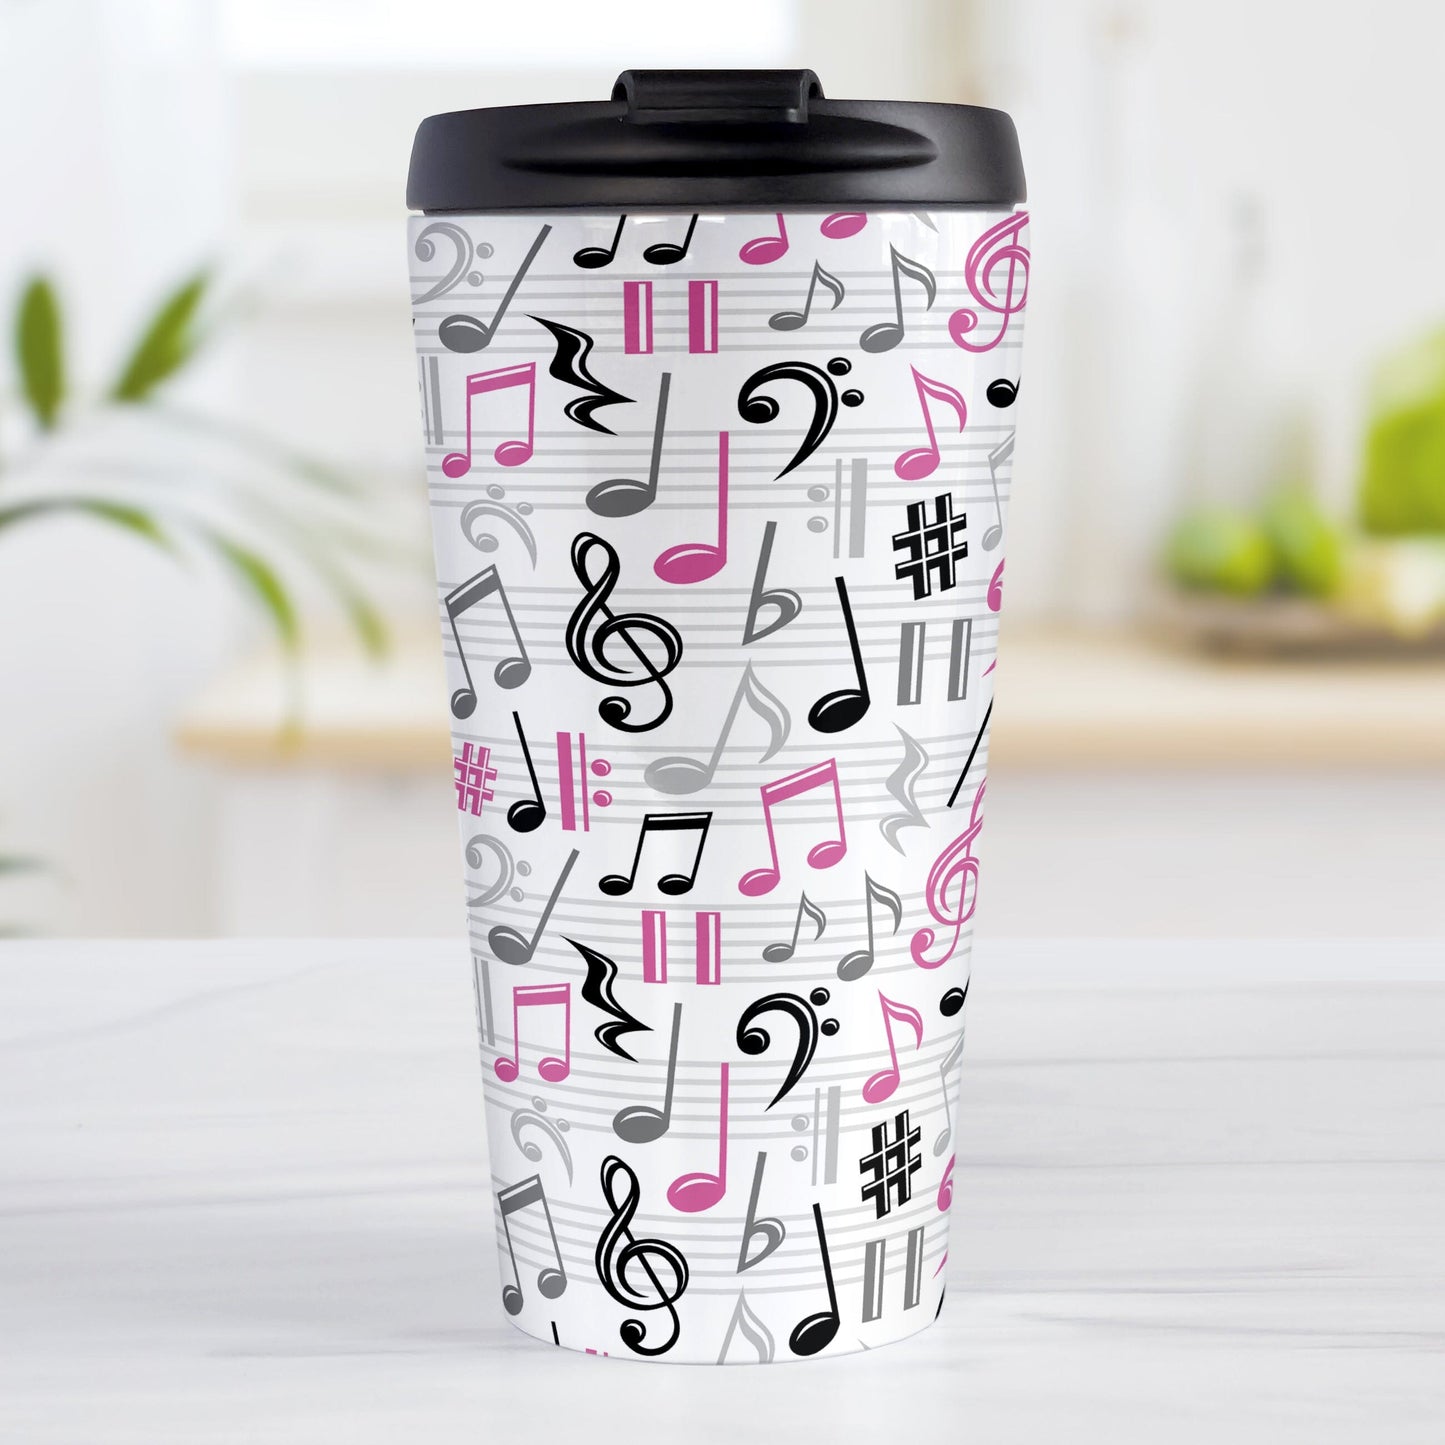 Pink Music Notes Pattern Travel Mug (15oz) at Amy's Coffee Mugs. A stainless steel travel mug designed with music notes and symbols in pink, black, and gray in a pattern that wraps around the travel mug.